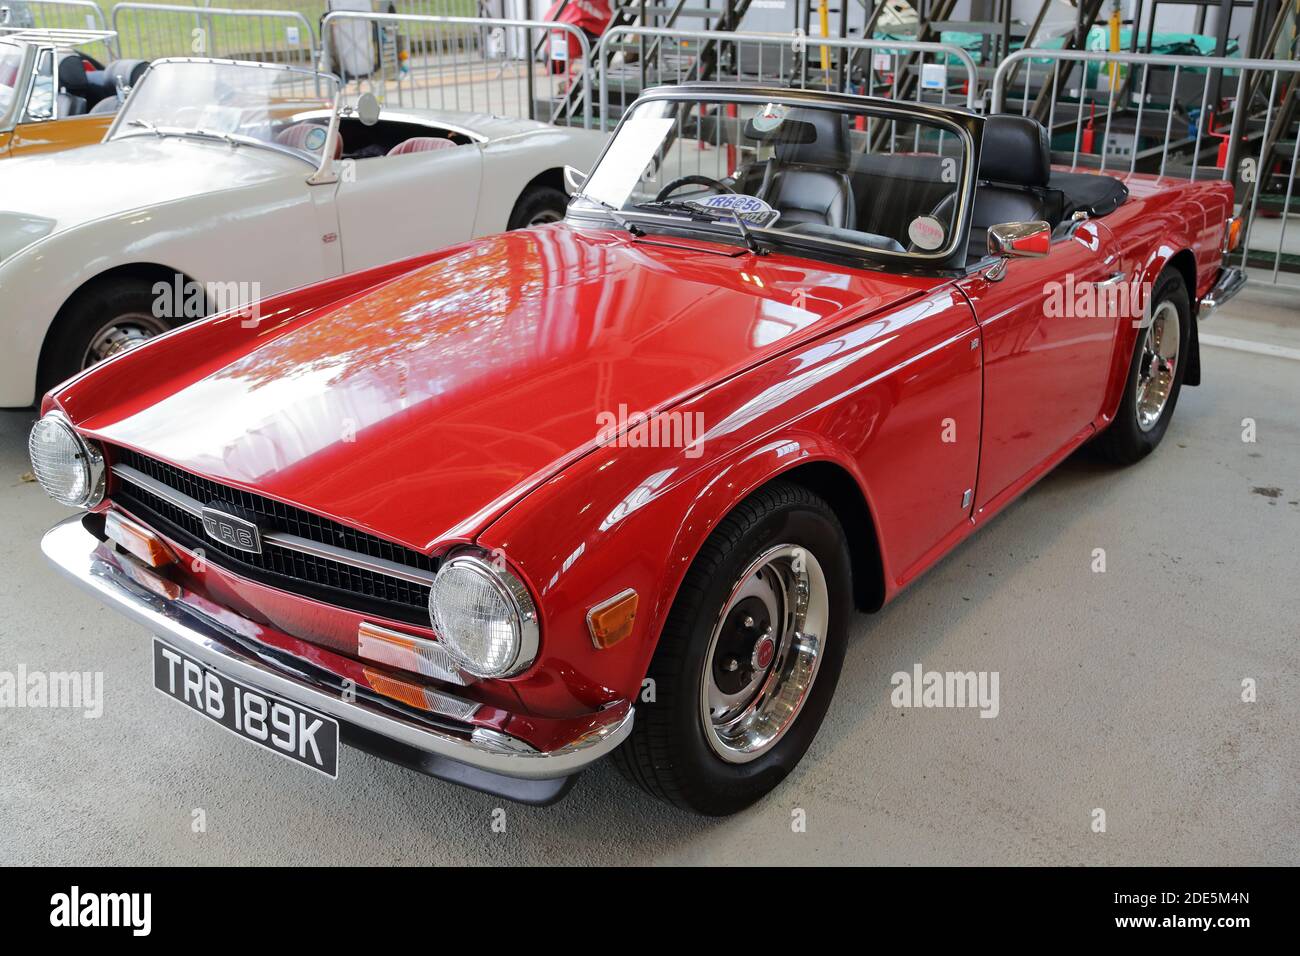 Lyn vægt Dingy Classic red Triumph TR6 at RAF Benson, Oxfordshire, UK Stock Photo - Alamy